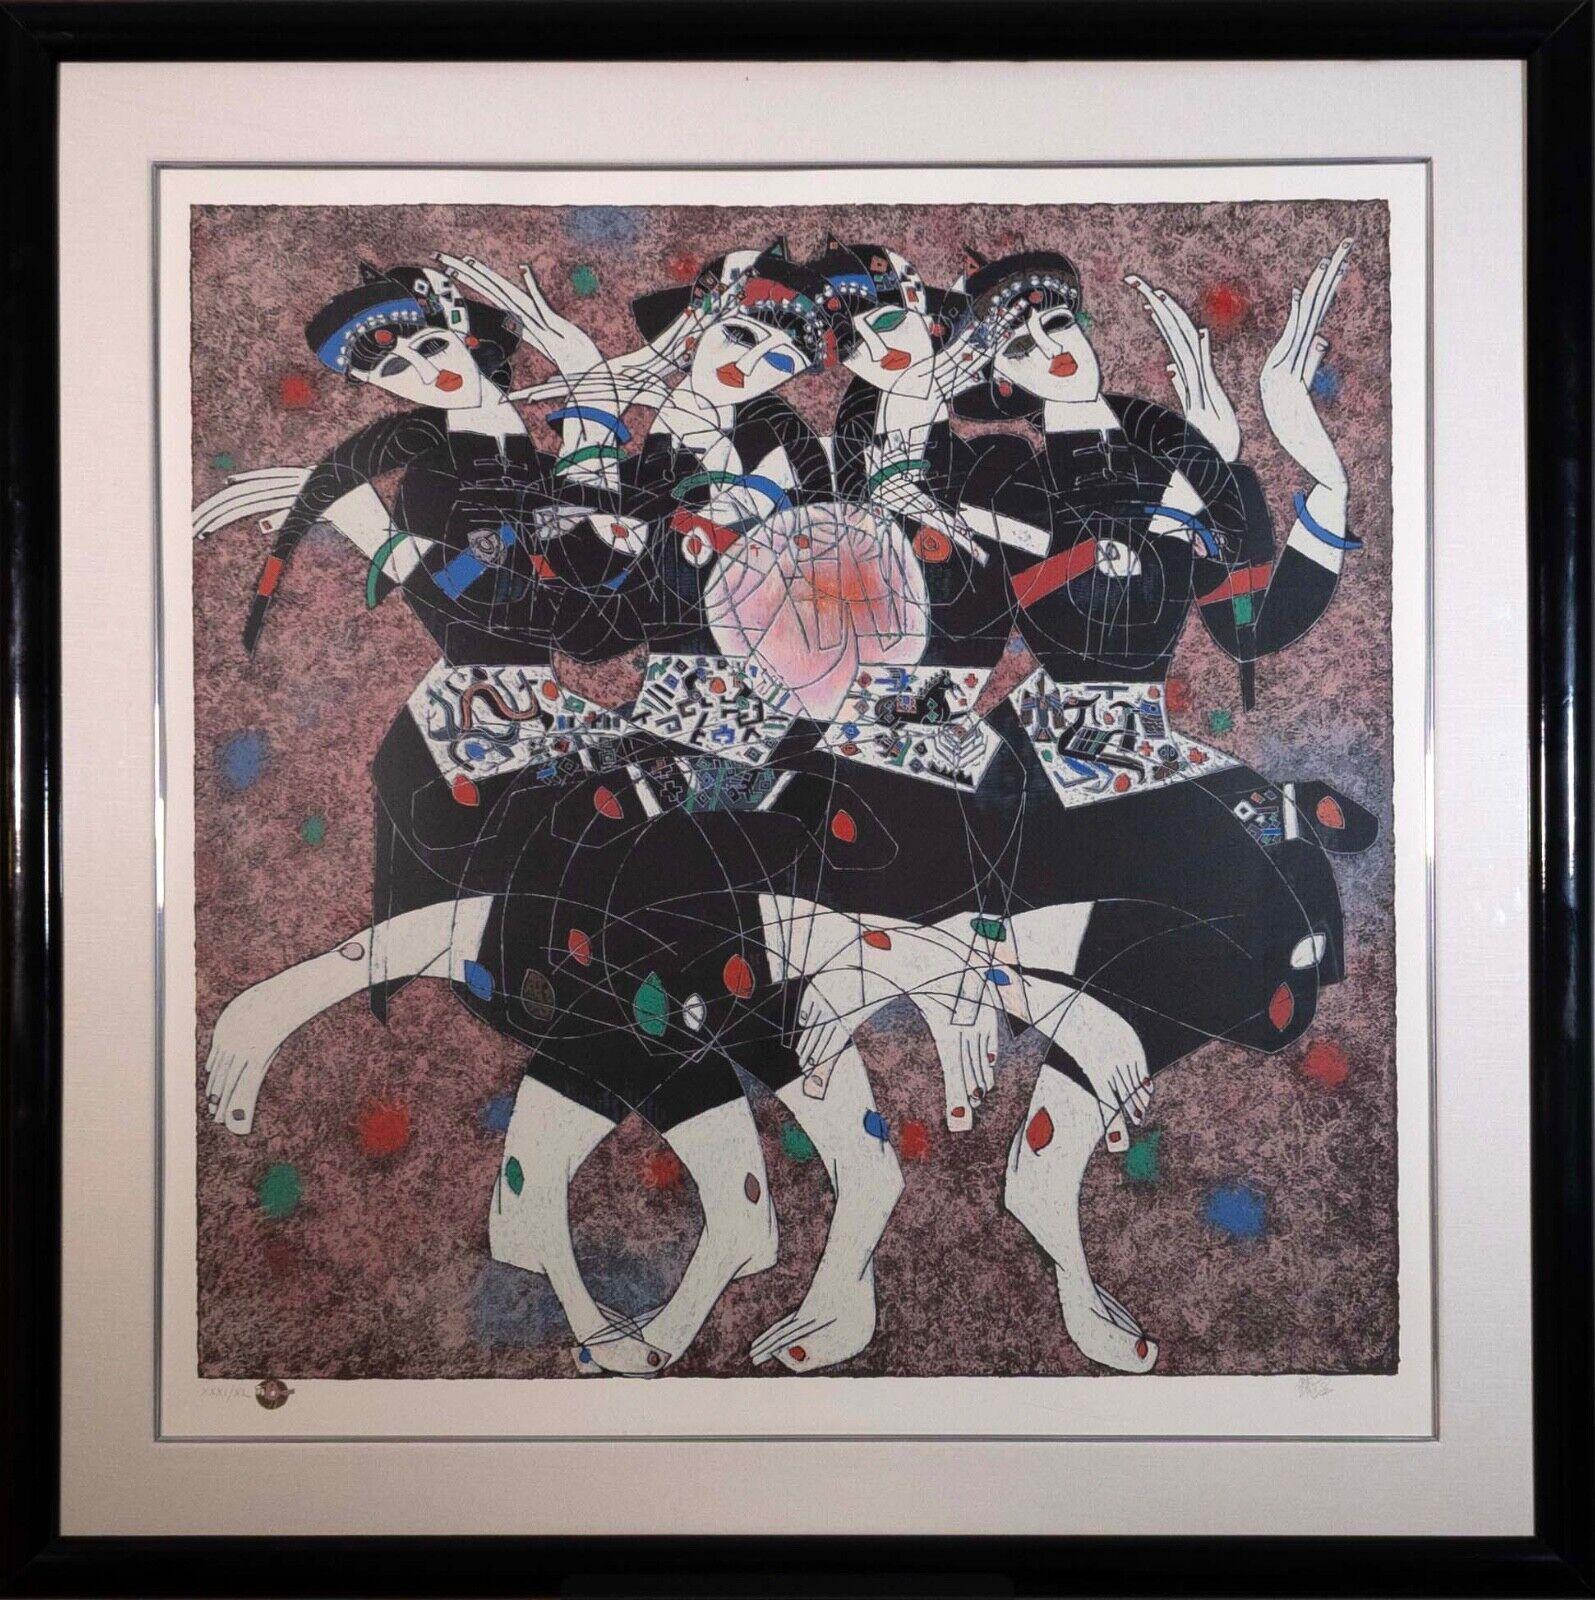 An energetic serigraph on paper titled “Moonlight Dance” by Chinese artist Jiang Tie Feng. Hand signed in pencil on the bottom right with an annotation of XXXI/XL on the bottom left. Published in 1986. Born in Zhejiang Province, China, Jiang